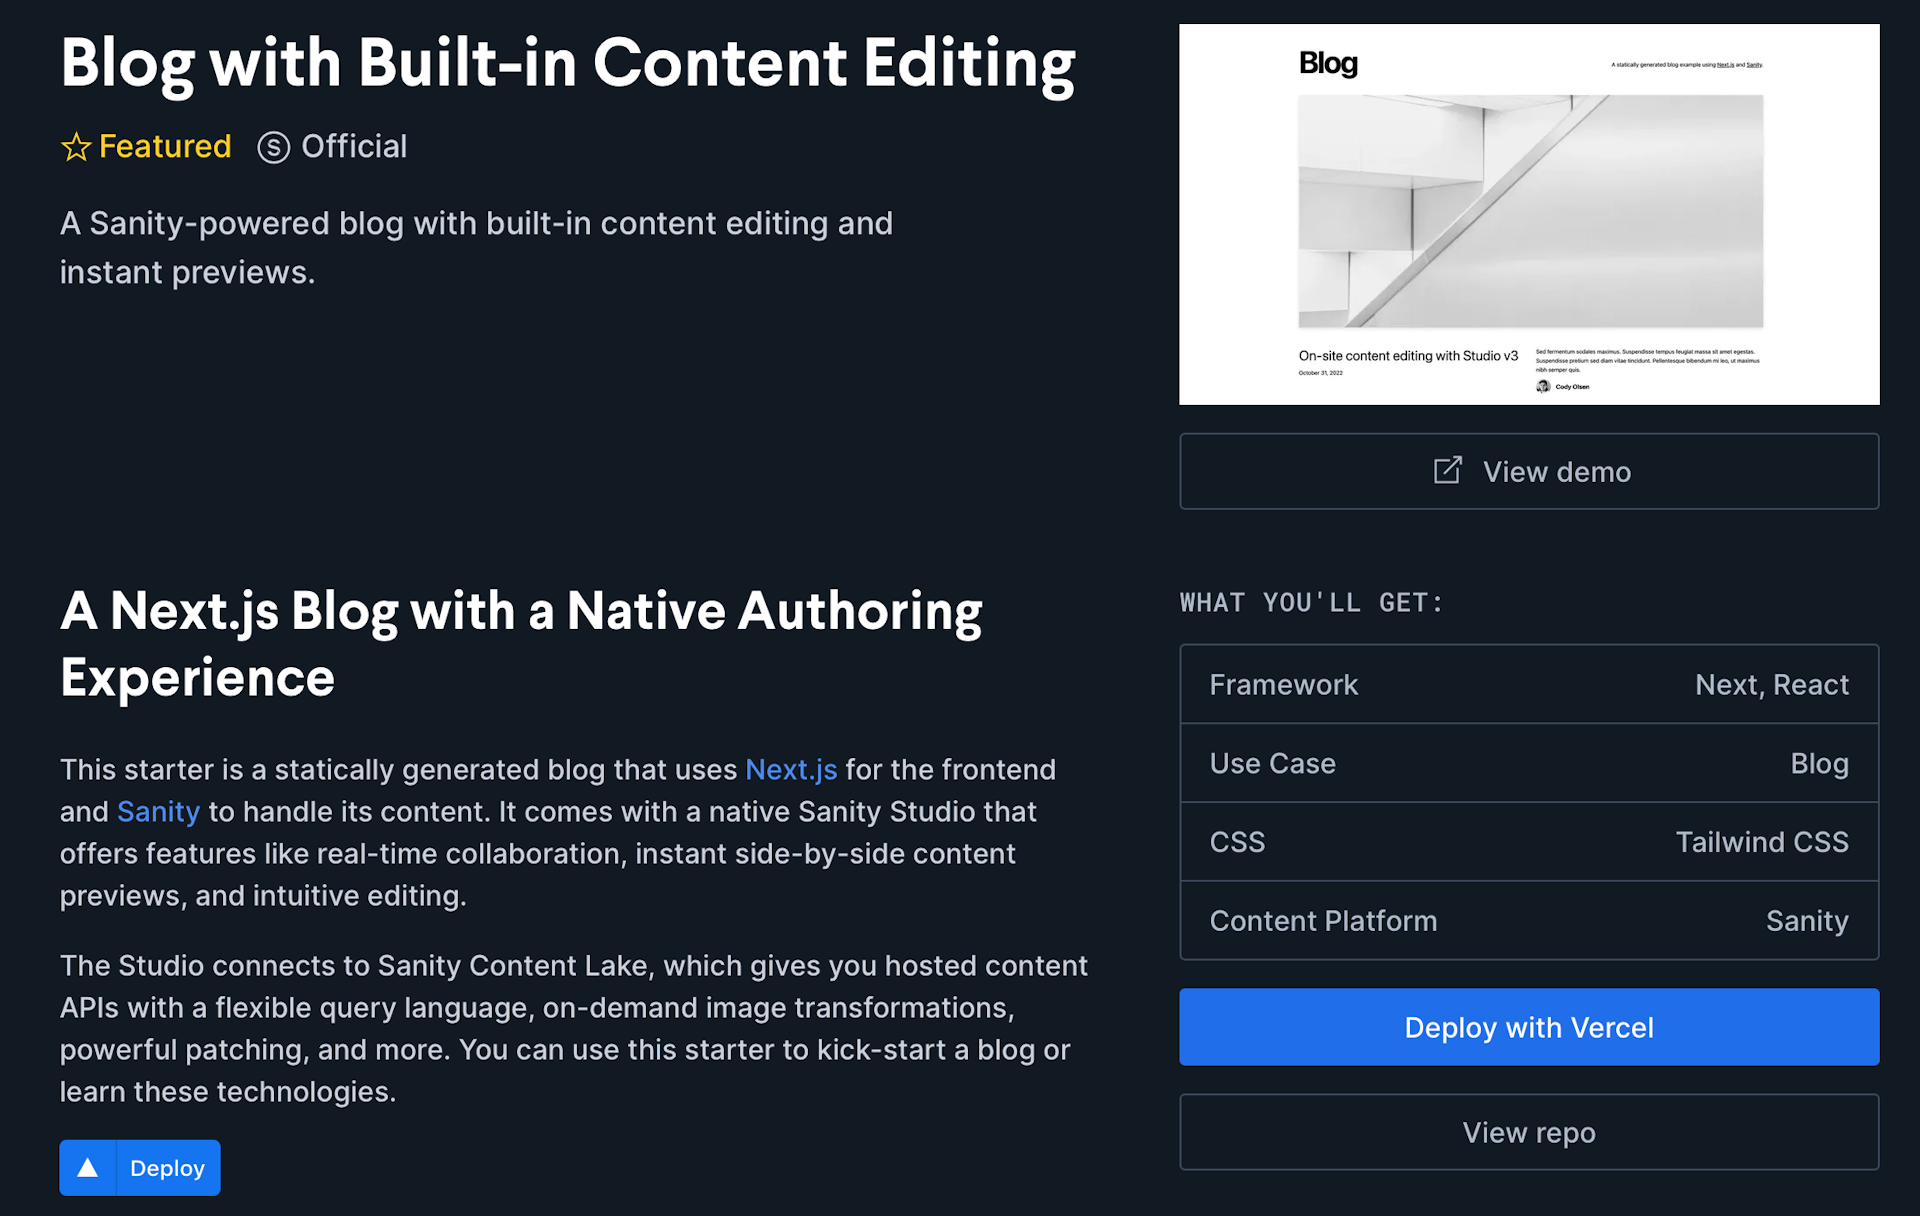 Sanity Blog with Built-in Content Editing template, showing deploy with Vercel